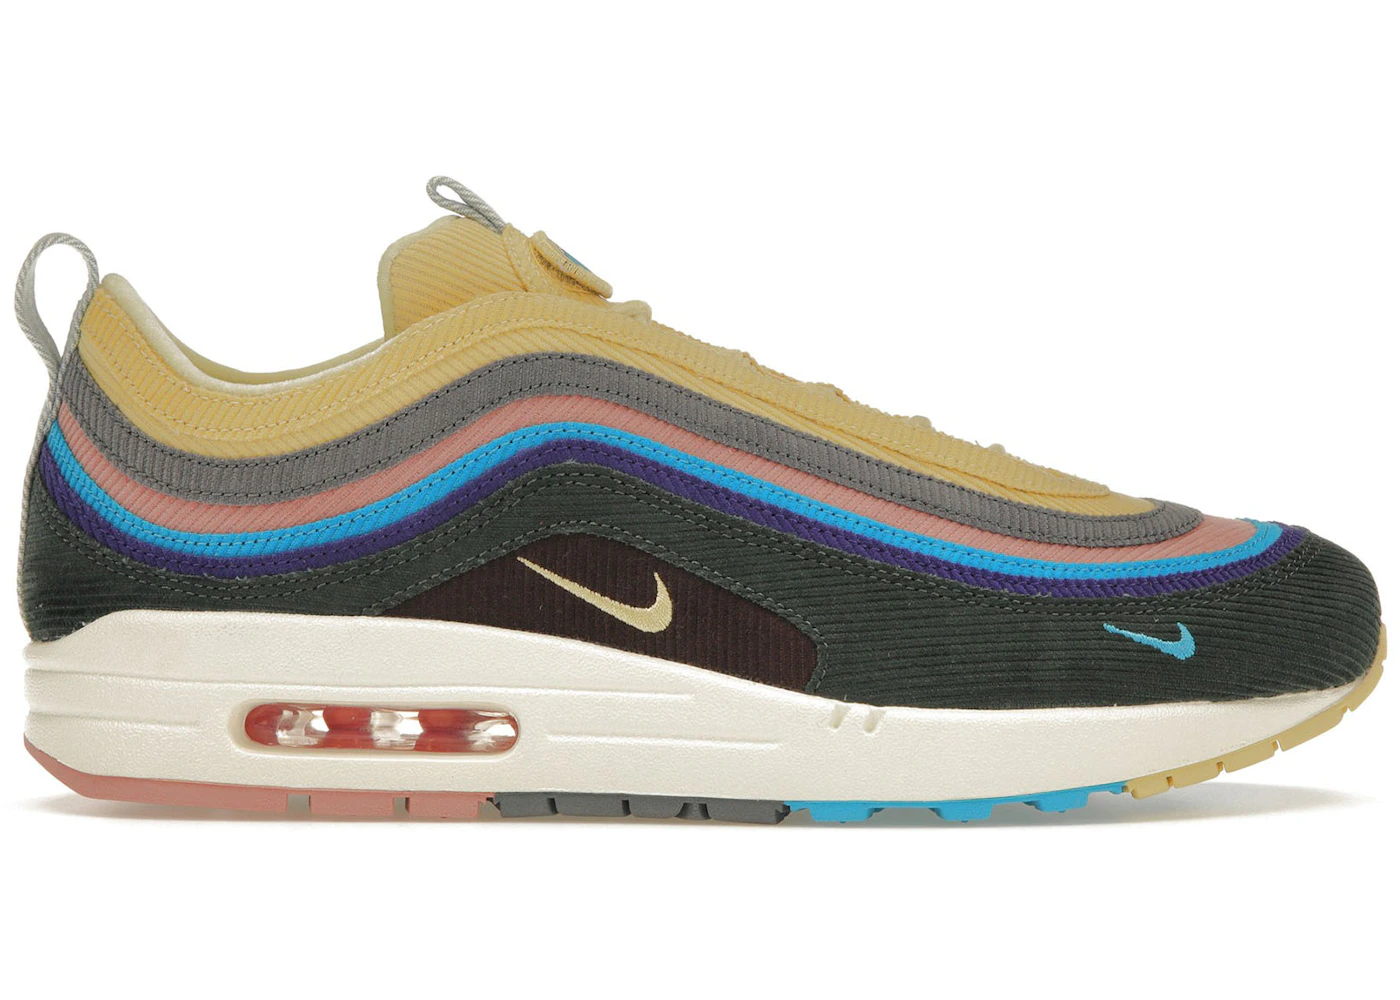 Nike Air Max 1/97 Sean Wotherspoon Lace Set Only) Men's - AJ4219-400 - US